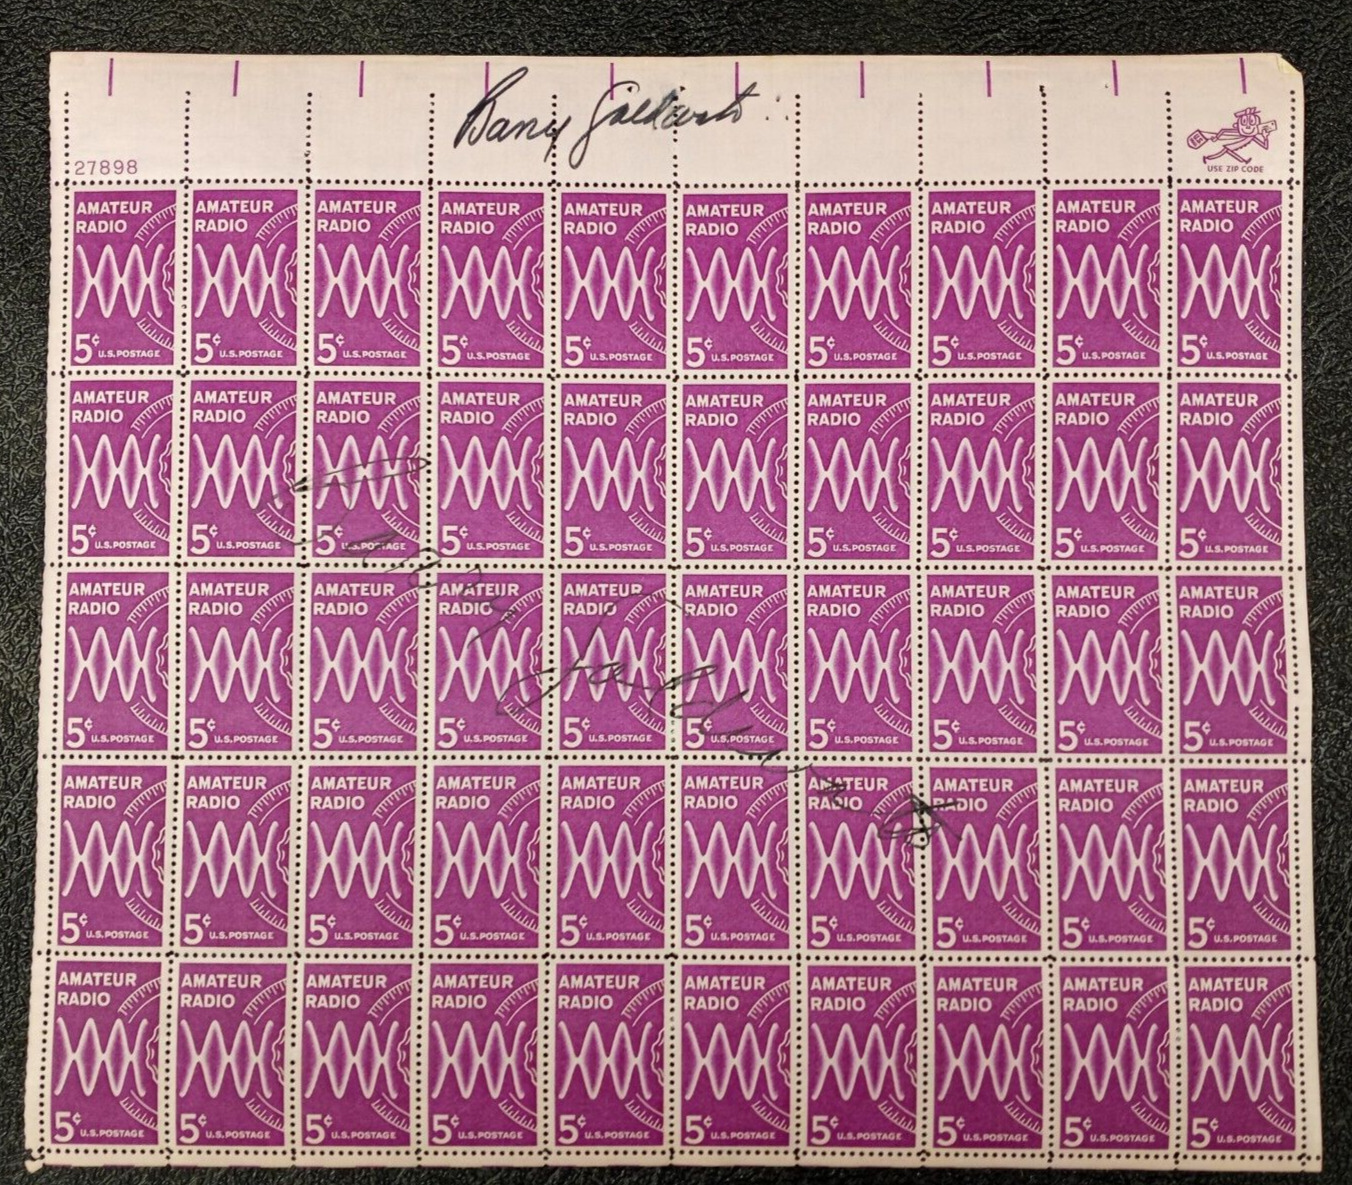 Barry Goldwater Signedx2 USPS Stamp Sheet - 5c \